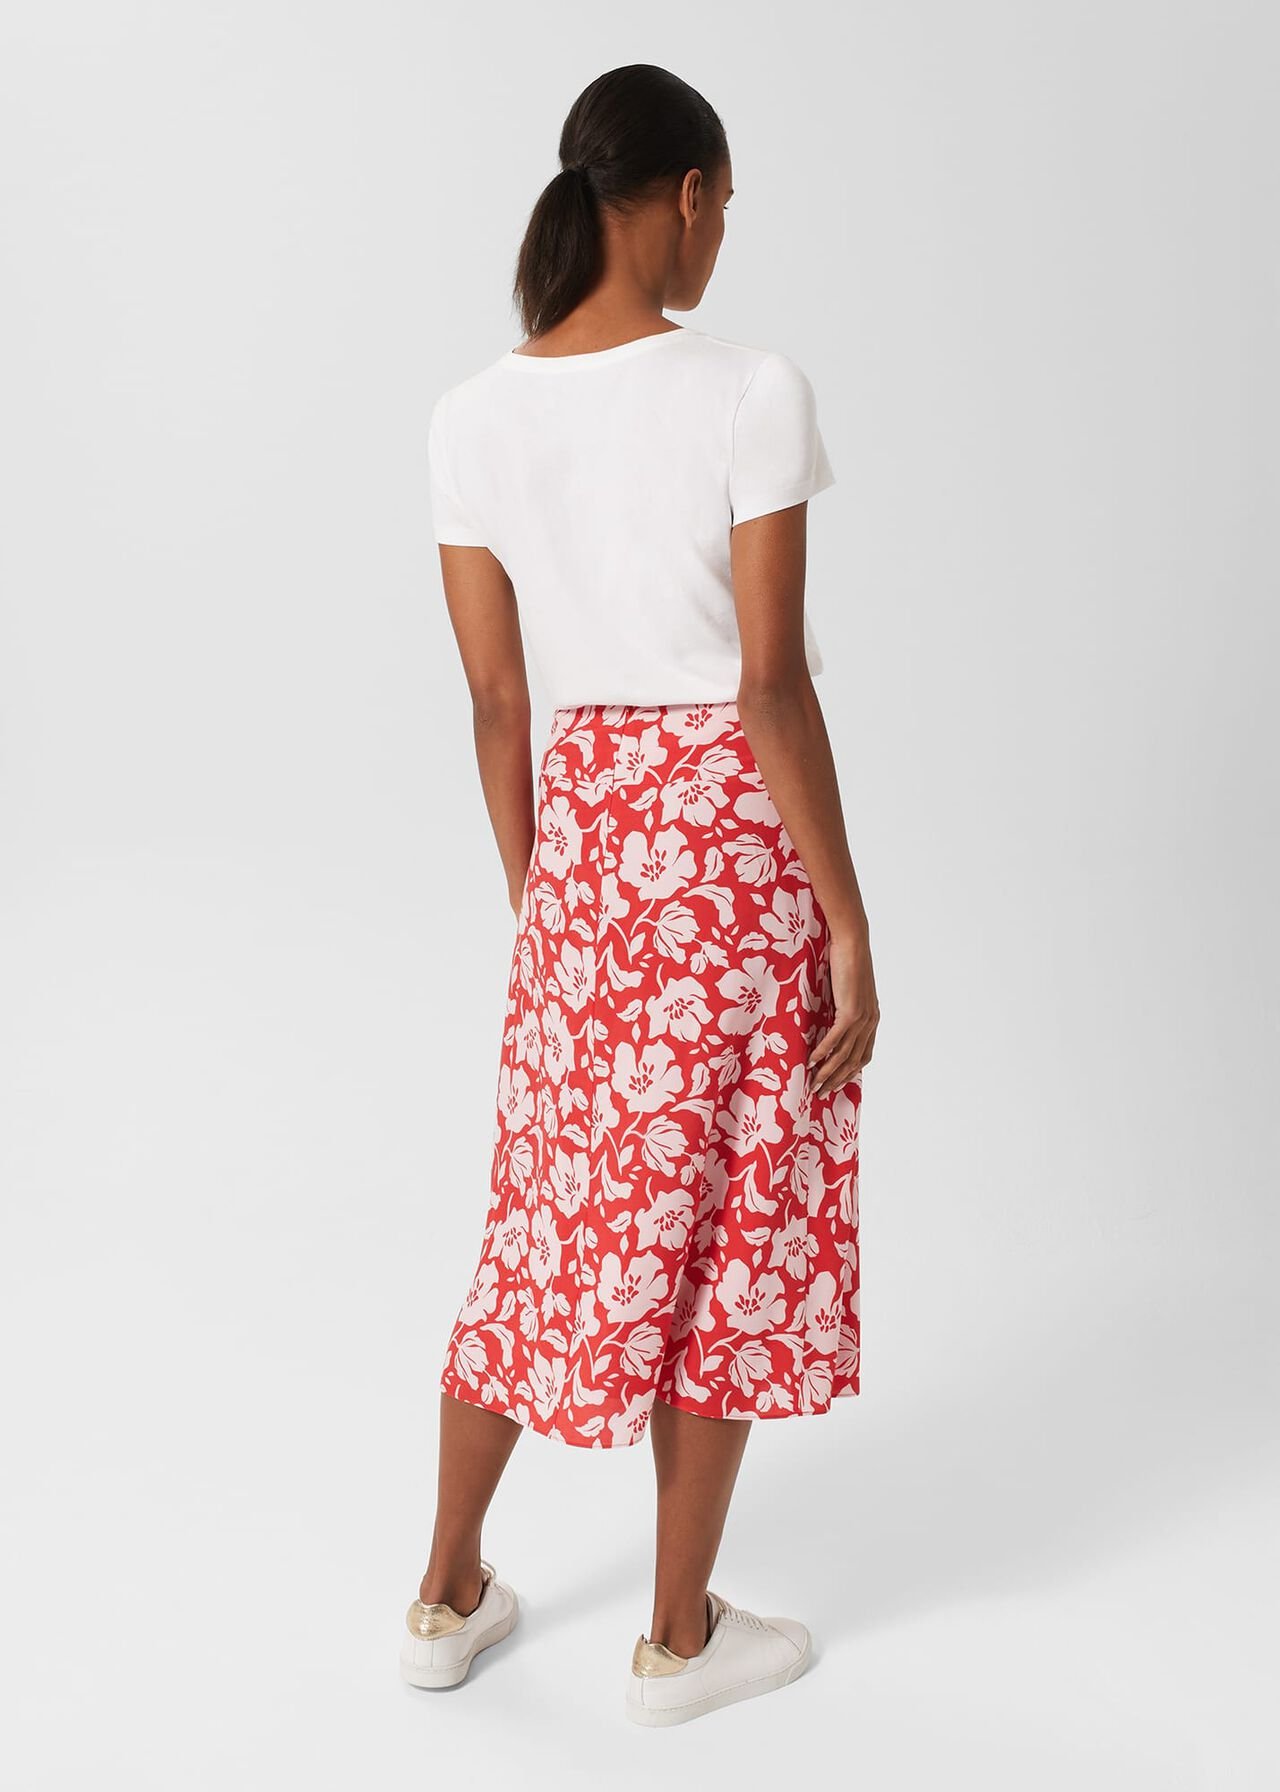 Angie Skirt, Red Pink, hi-res